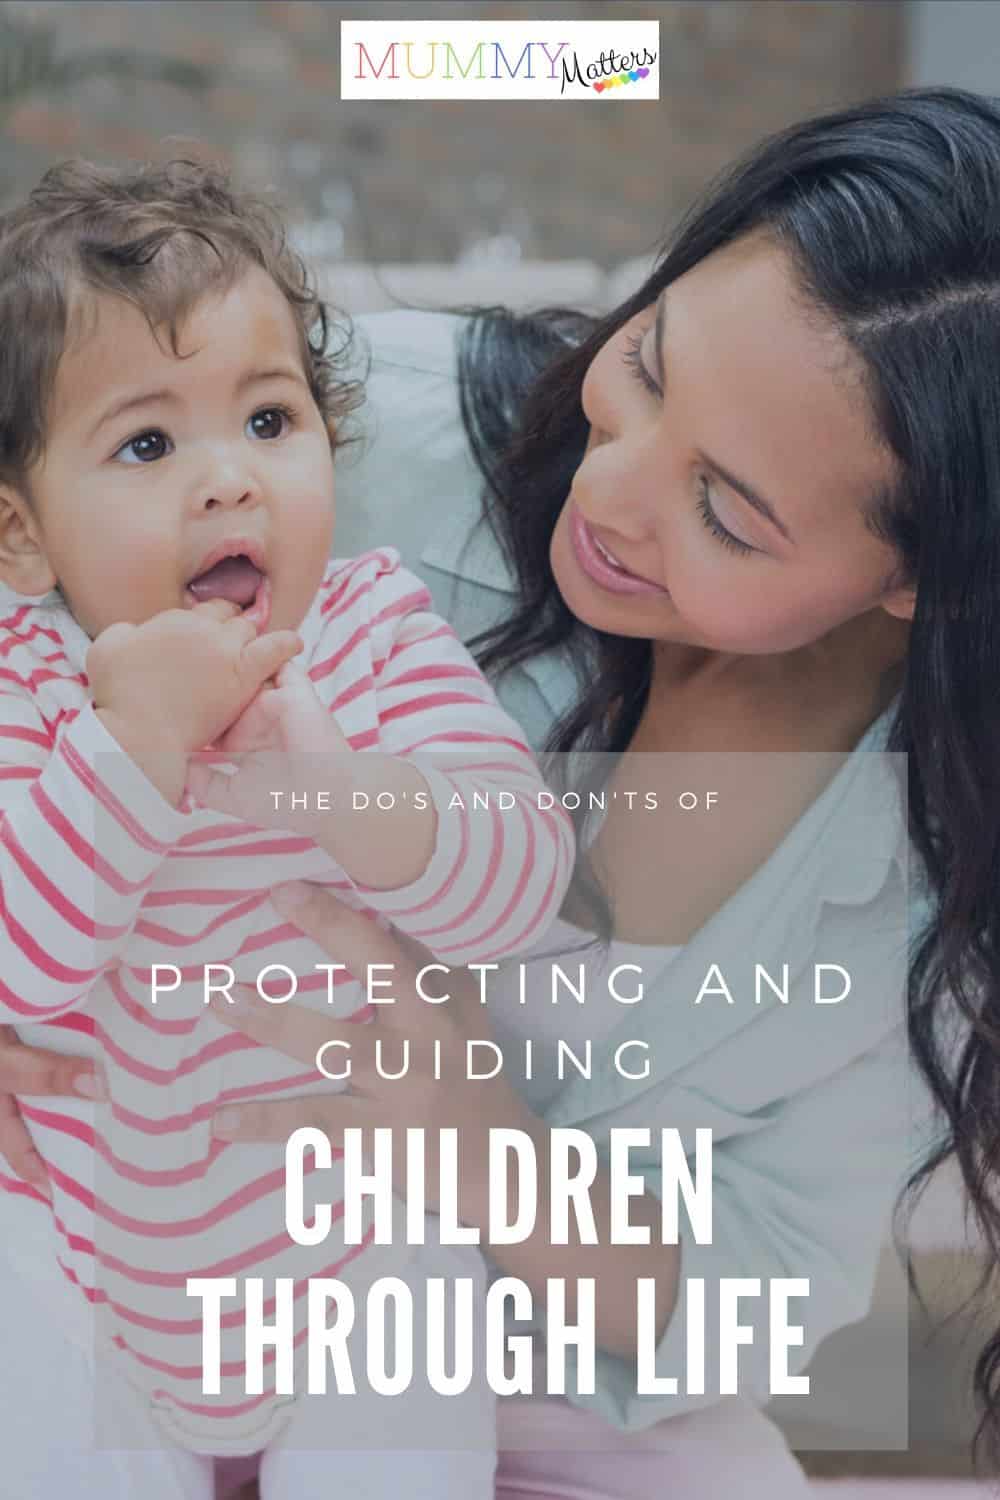 Raising children has always been a delicate process. Here are some common “do’s” and “don’ts” of protecting and guiding your children through their early lives.